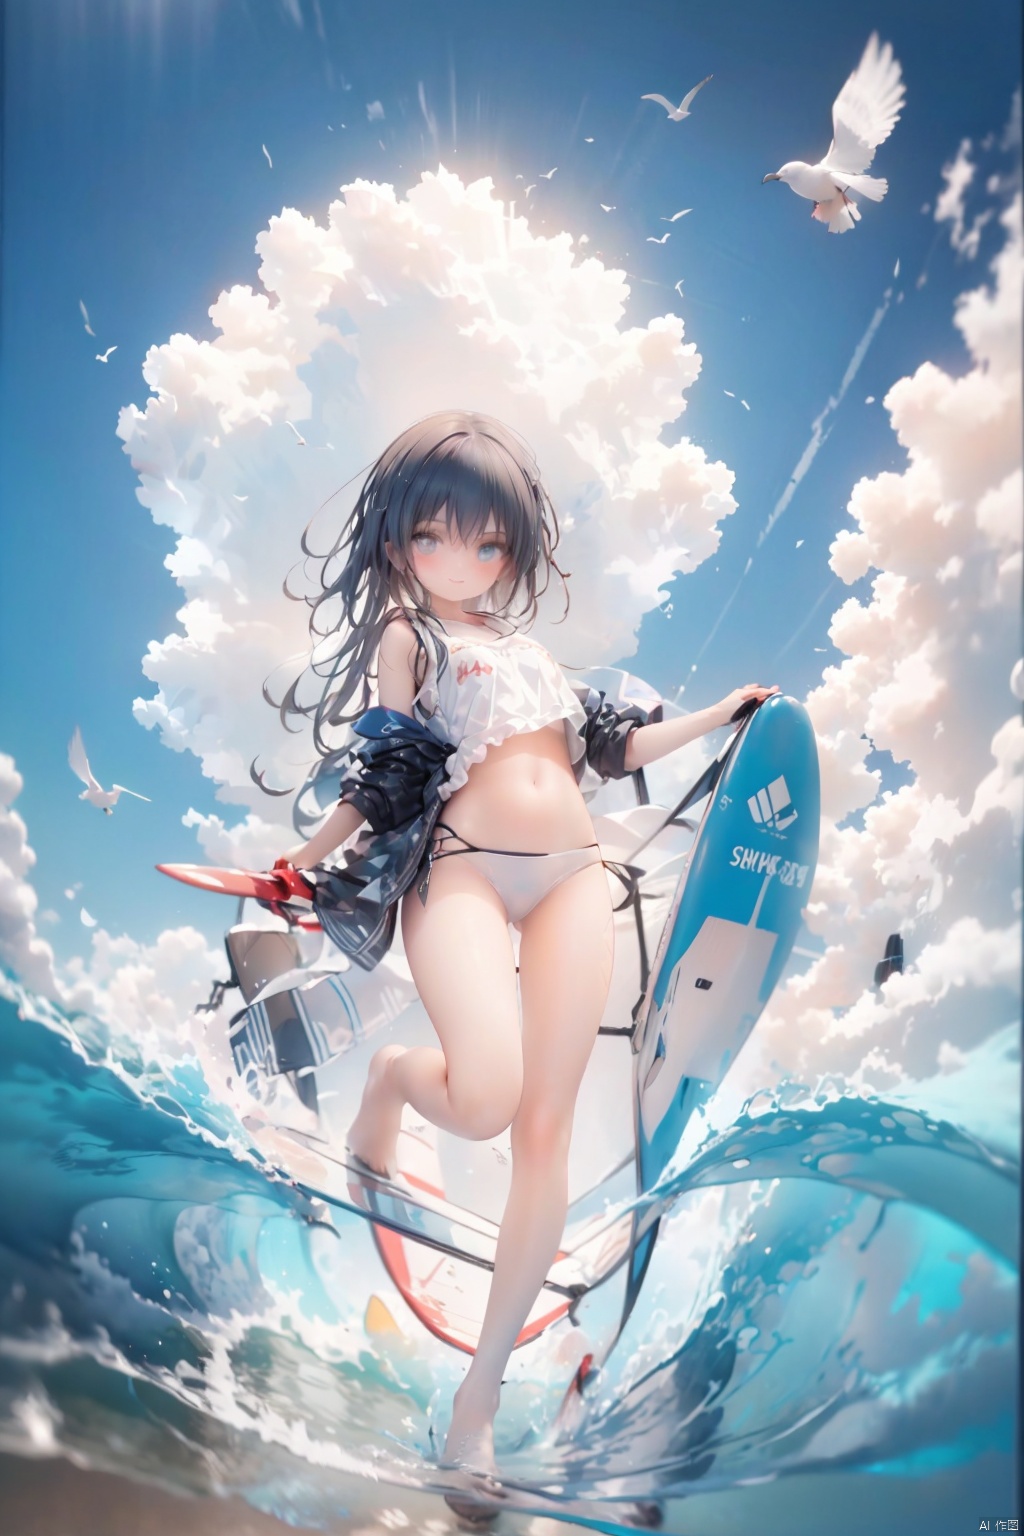  A girl, wide-angle lens, surfing, waves, balance, agility, confidence, smile, ocean atmosphere, sea breeze, seagulls, sense of achievement, galloping, agile, elegant, challenging oneself, wheat color, tight surfing suit, graceful posture, bending down, standing up, natural and smooth, roaring, comfortable, lively and energetic.